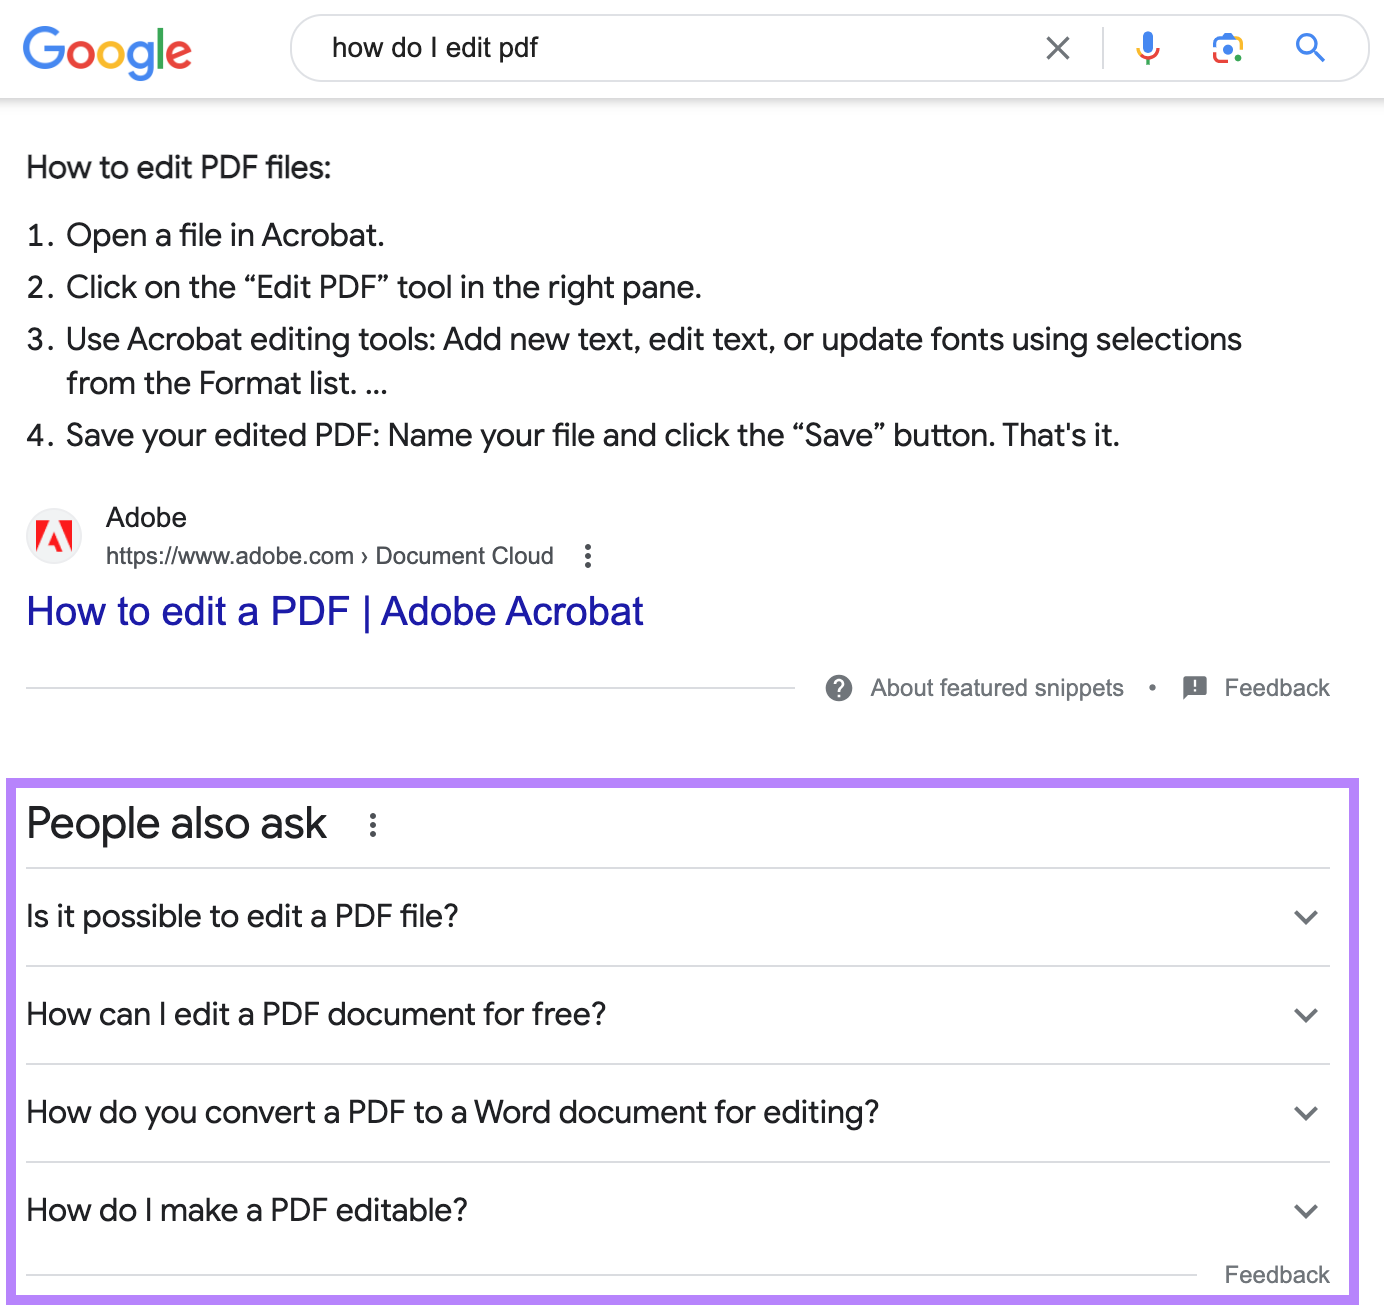 an example of "People also ask" block in Google SERP for "،w do i edit pdf"